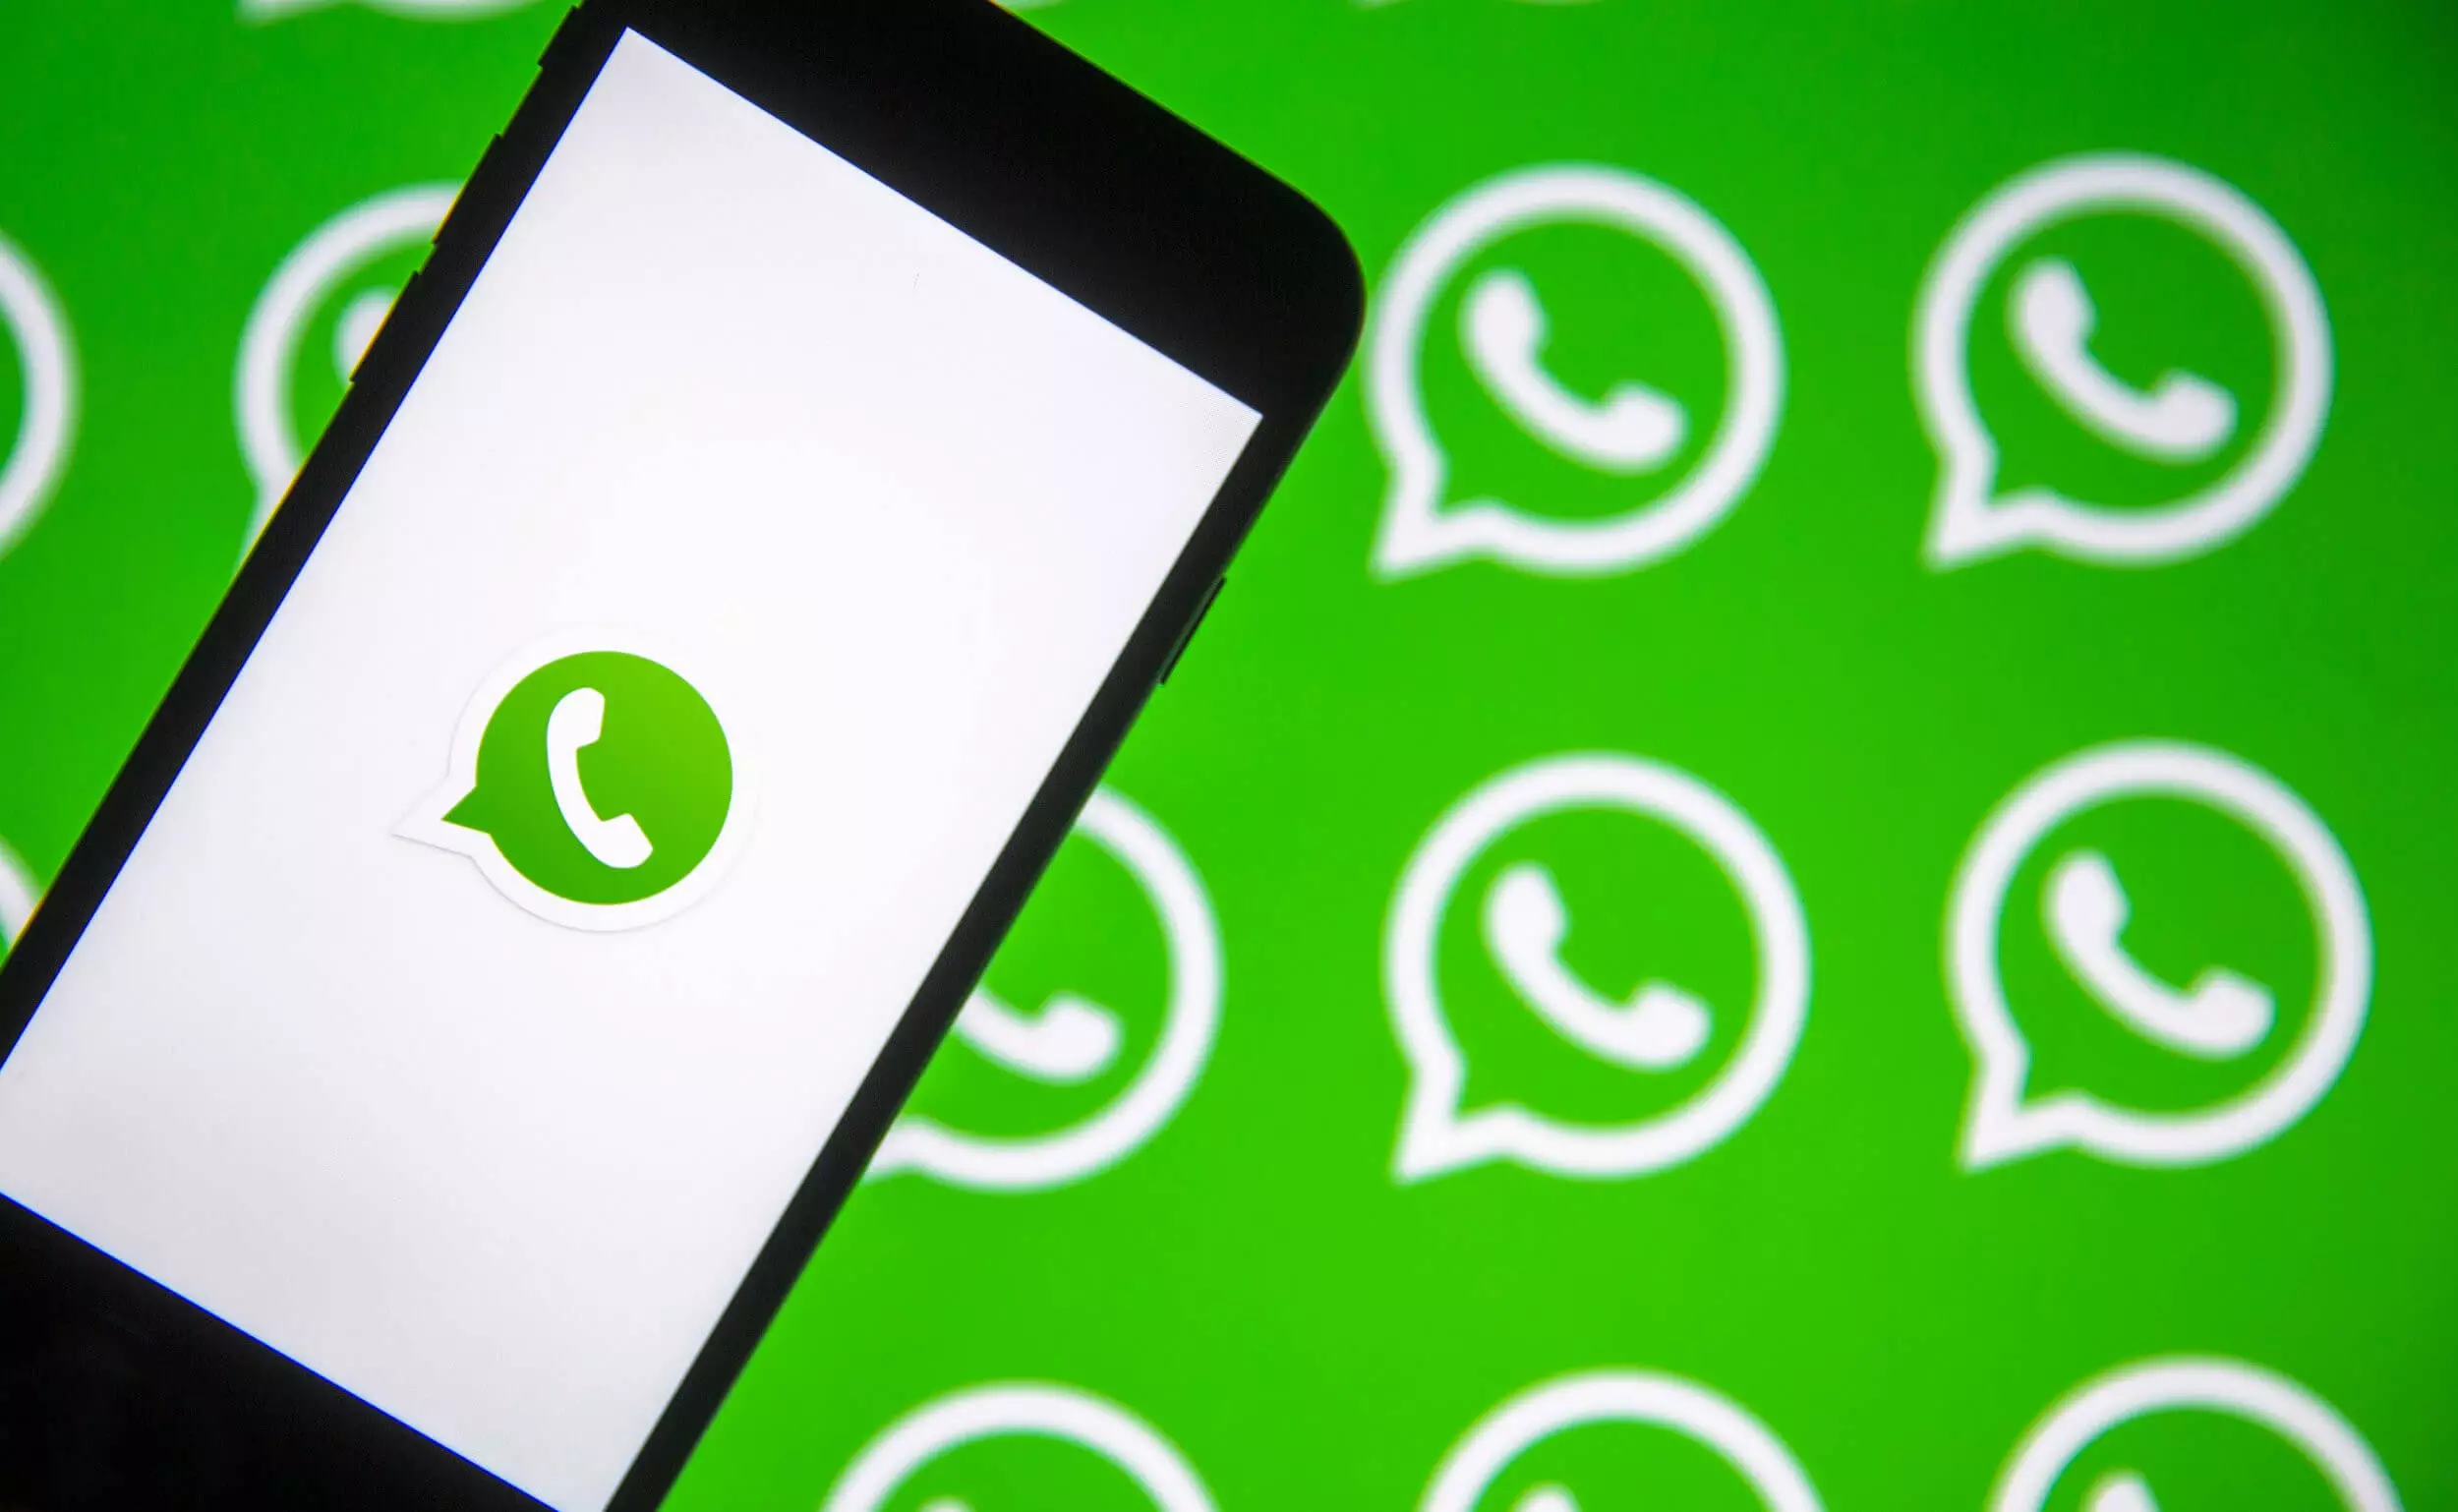 Pros and Cons of Using WhatsApp GB - Everything You Need to Know